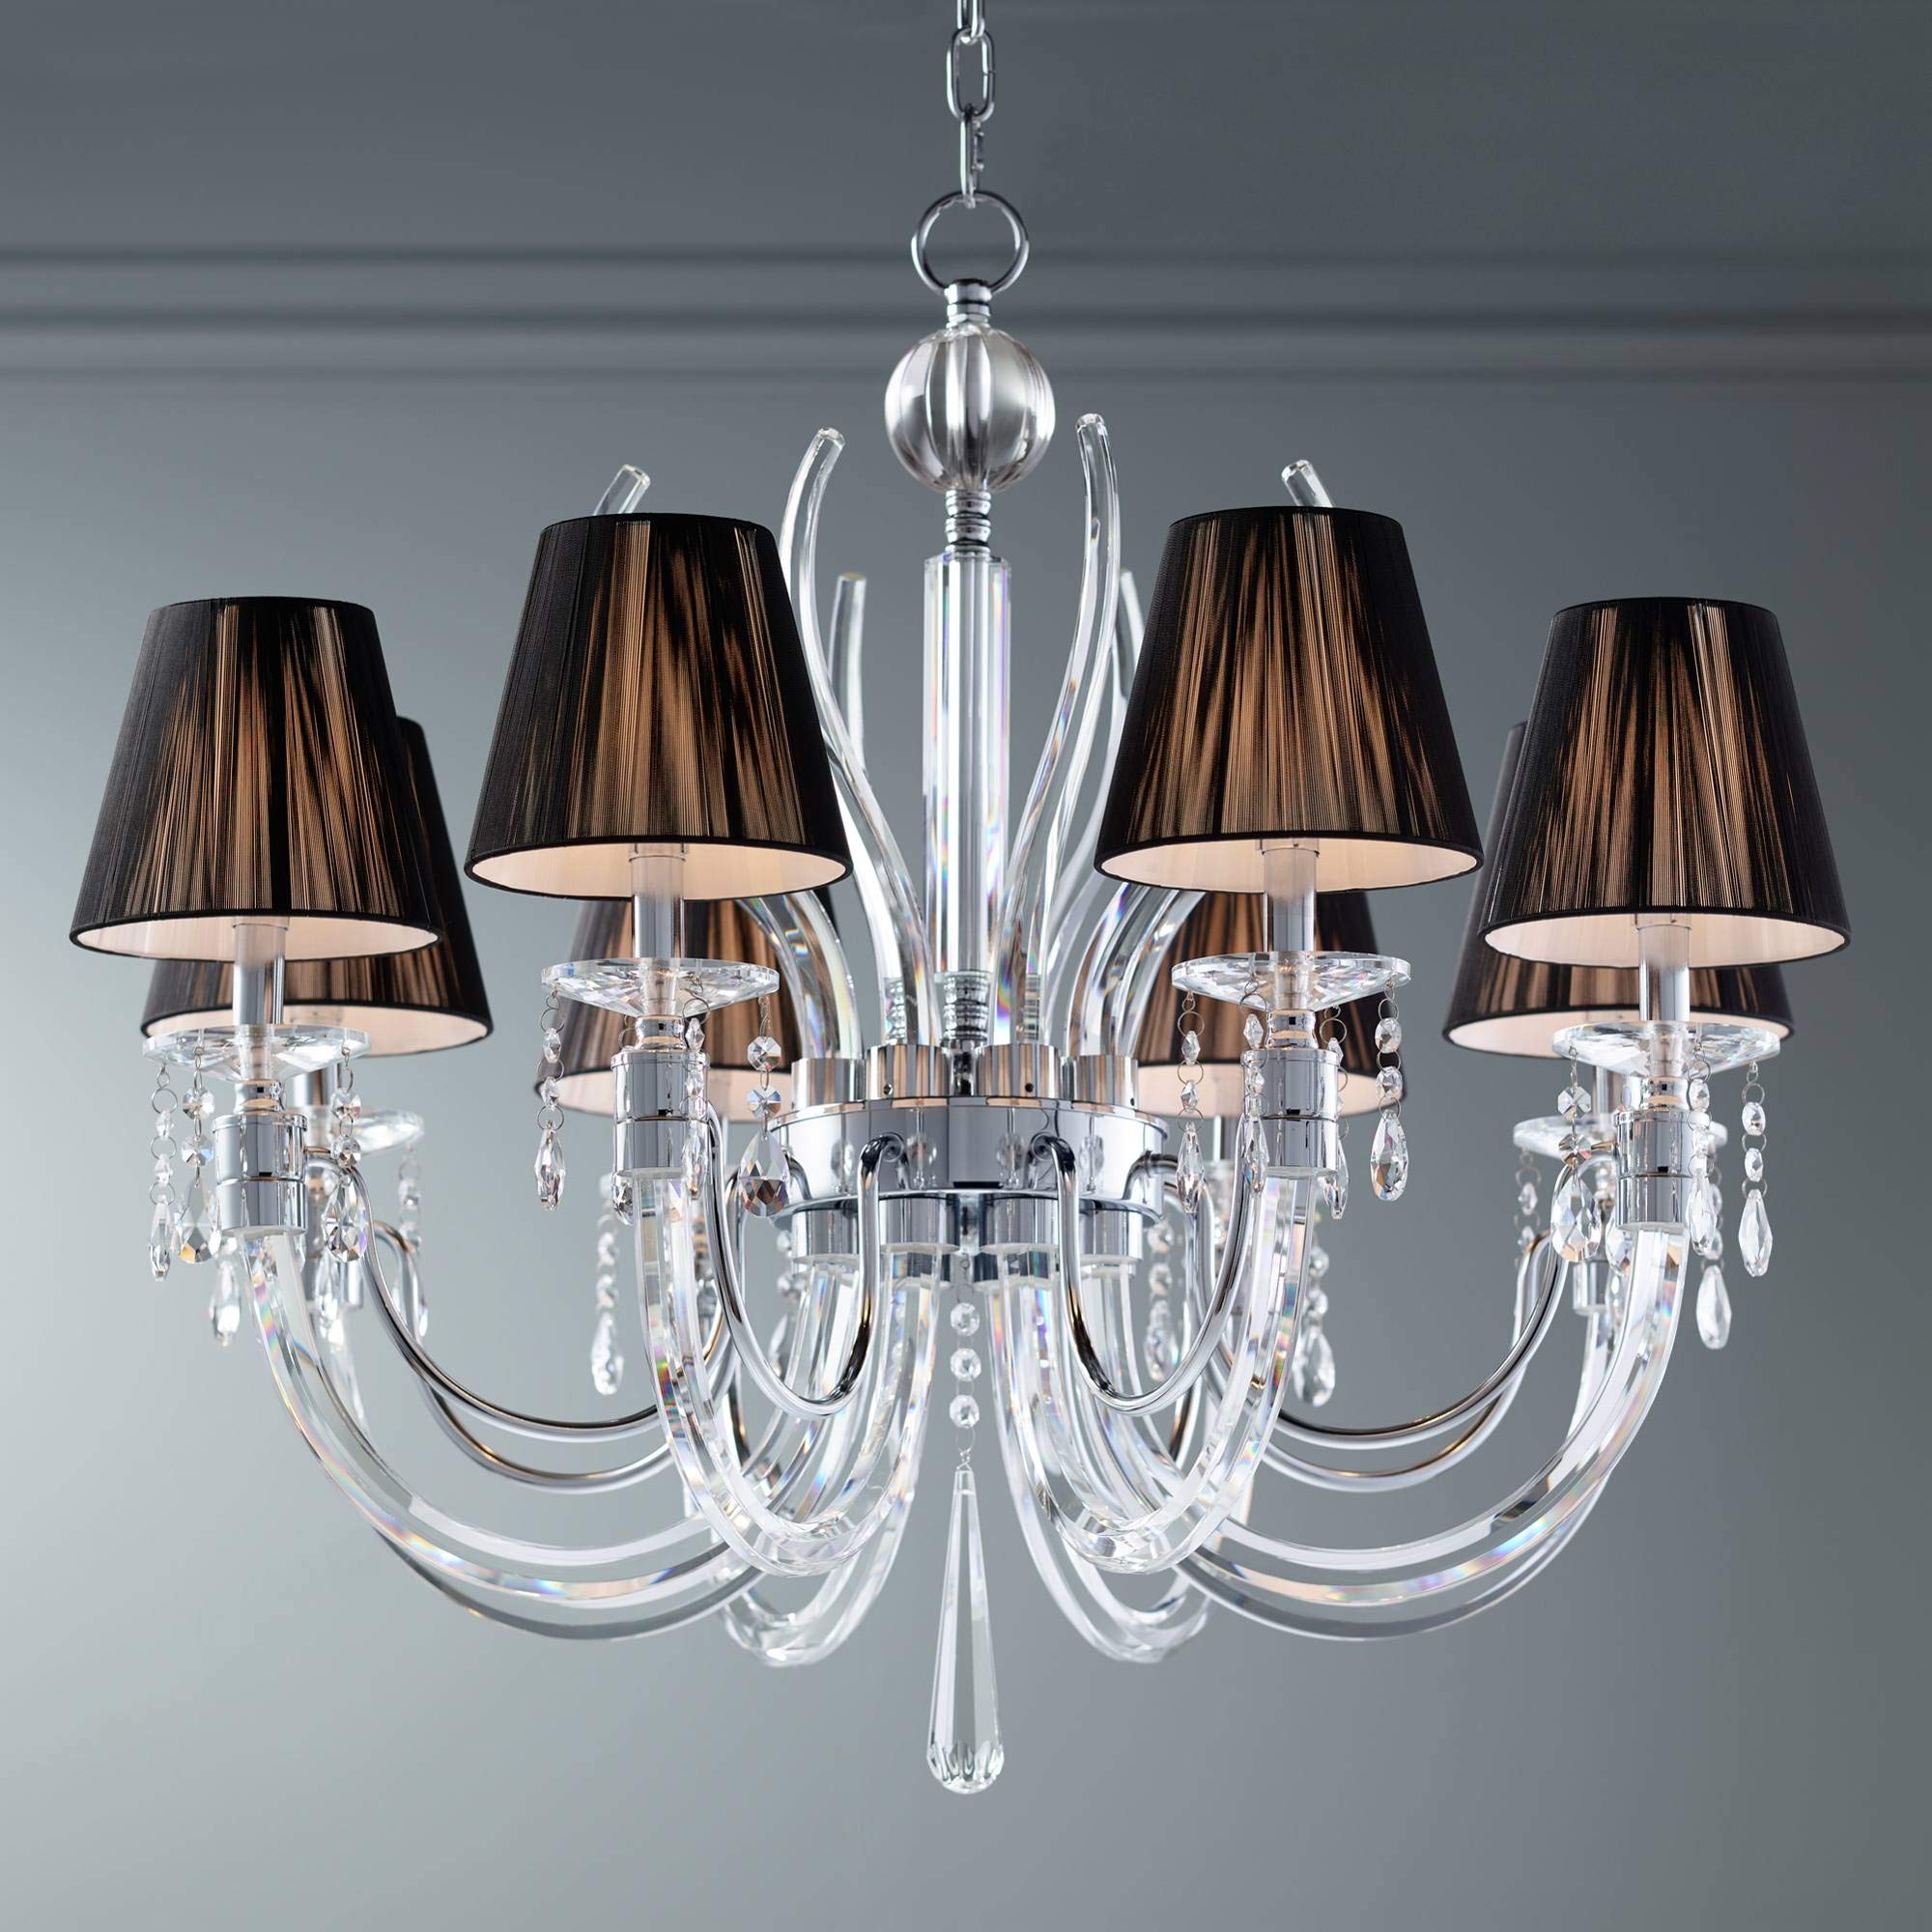 Vienna Full Spectrum Derry Street chrome Large chandelier 32 Wide crystal Arm Black Silk Shades 8-Light Fixture for Dining Room House Foyer Entryway